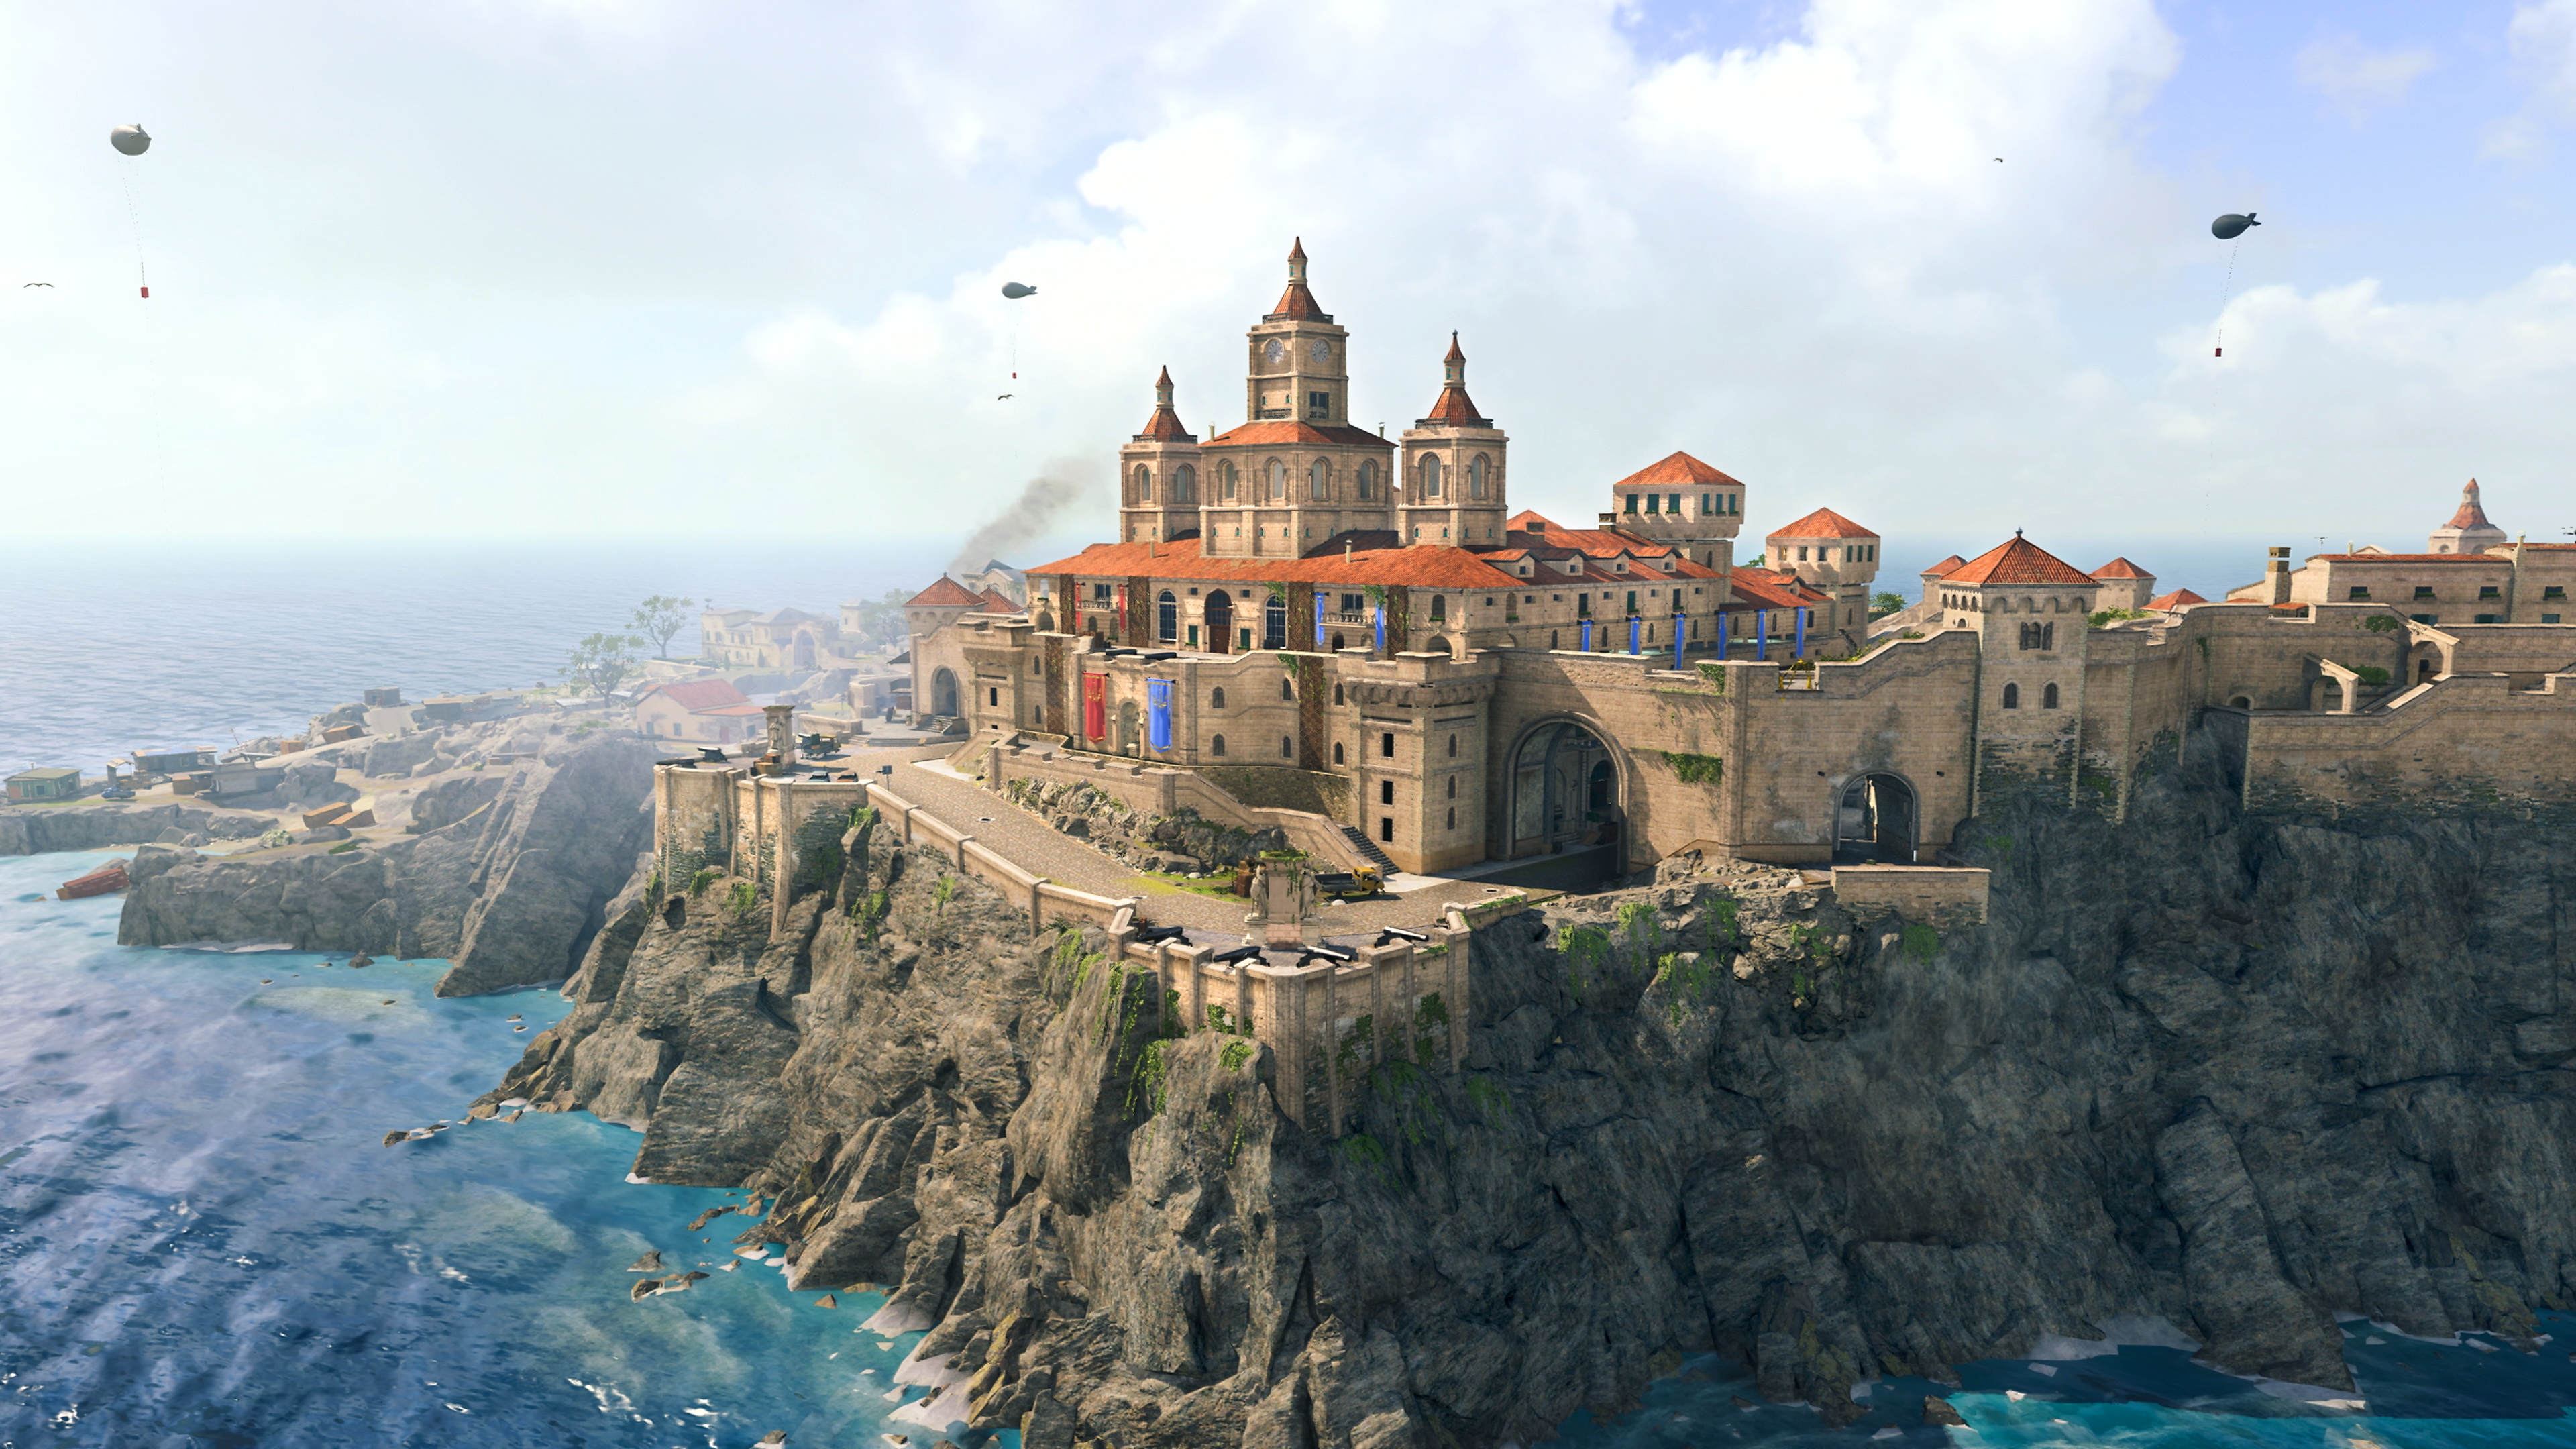 Call of Duty Warzone screenshot showing new map Fortune's Keep featuring a large building next to a cliff by the ocean